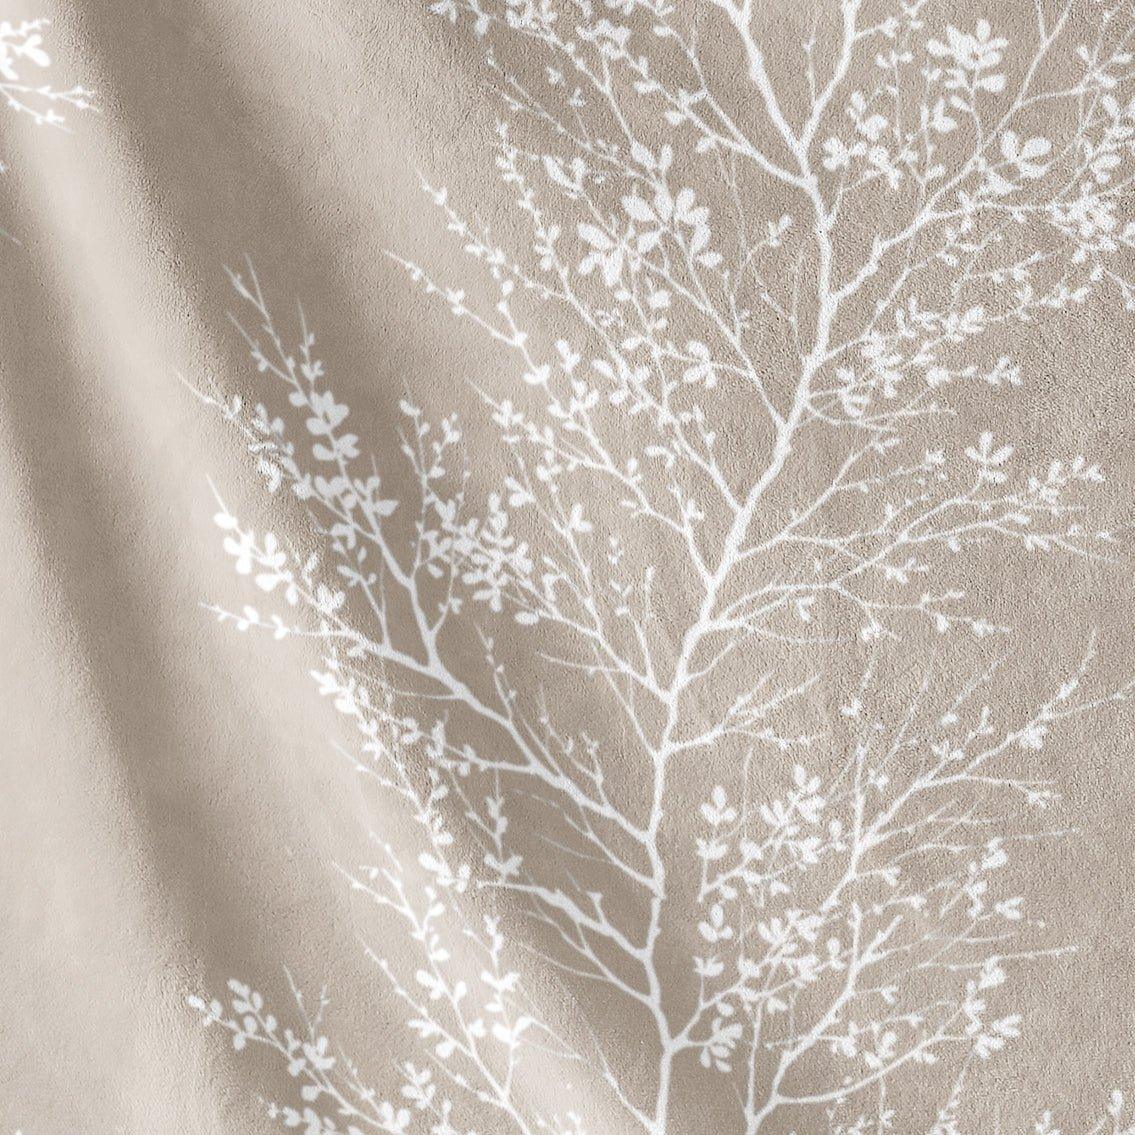 Ultra Soft Oversized Plush Foliage Throw Blanket - Stylish Home Décor for Bed or Couch - Spirit Linen